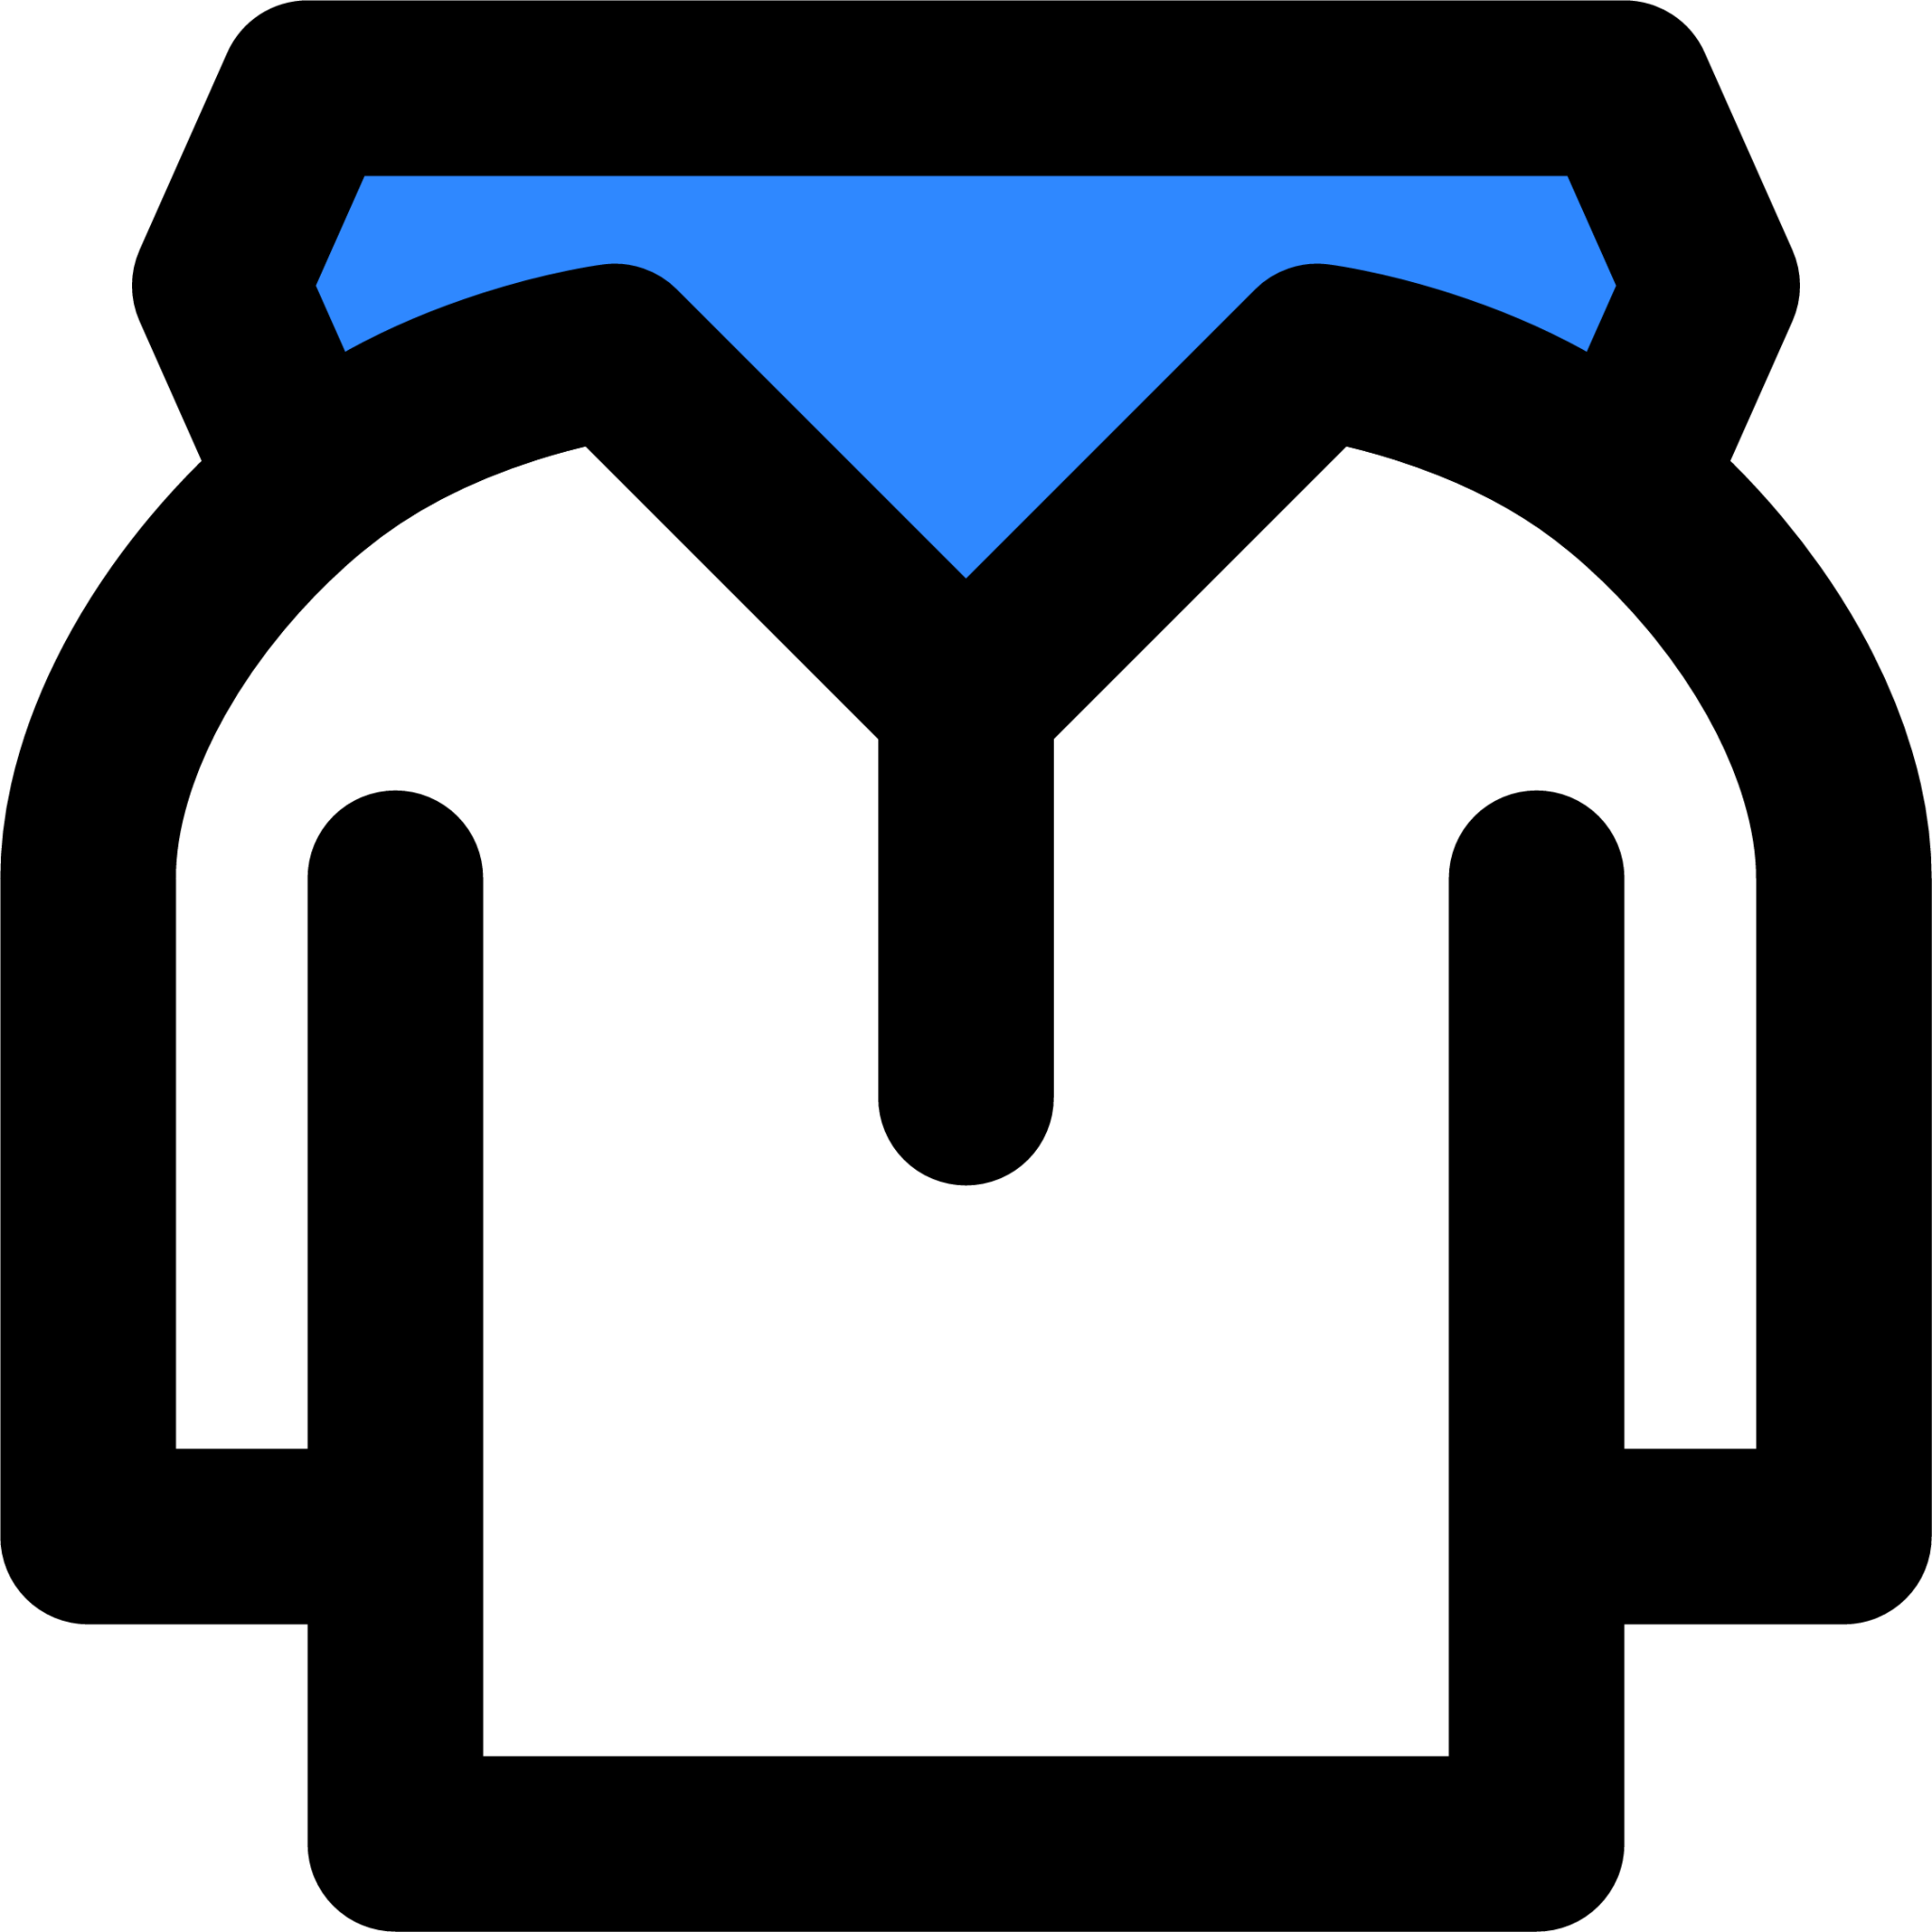 clothes hoodie icon